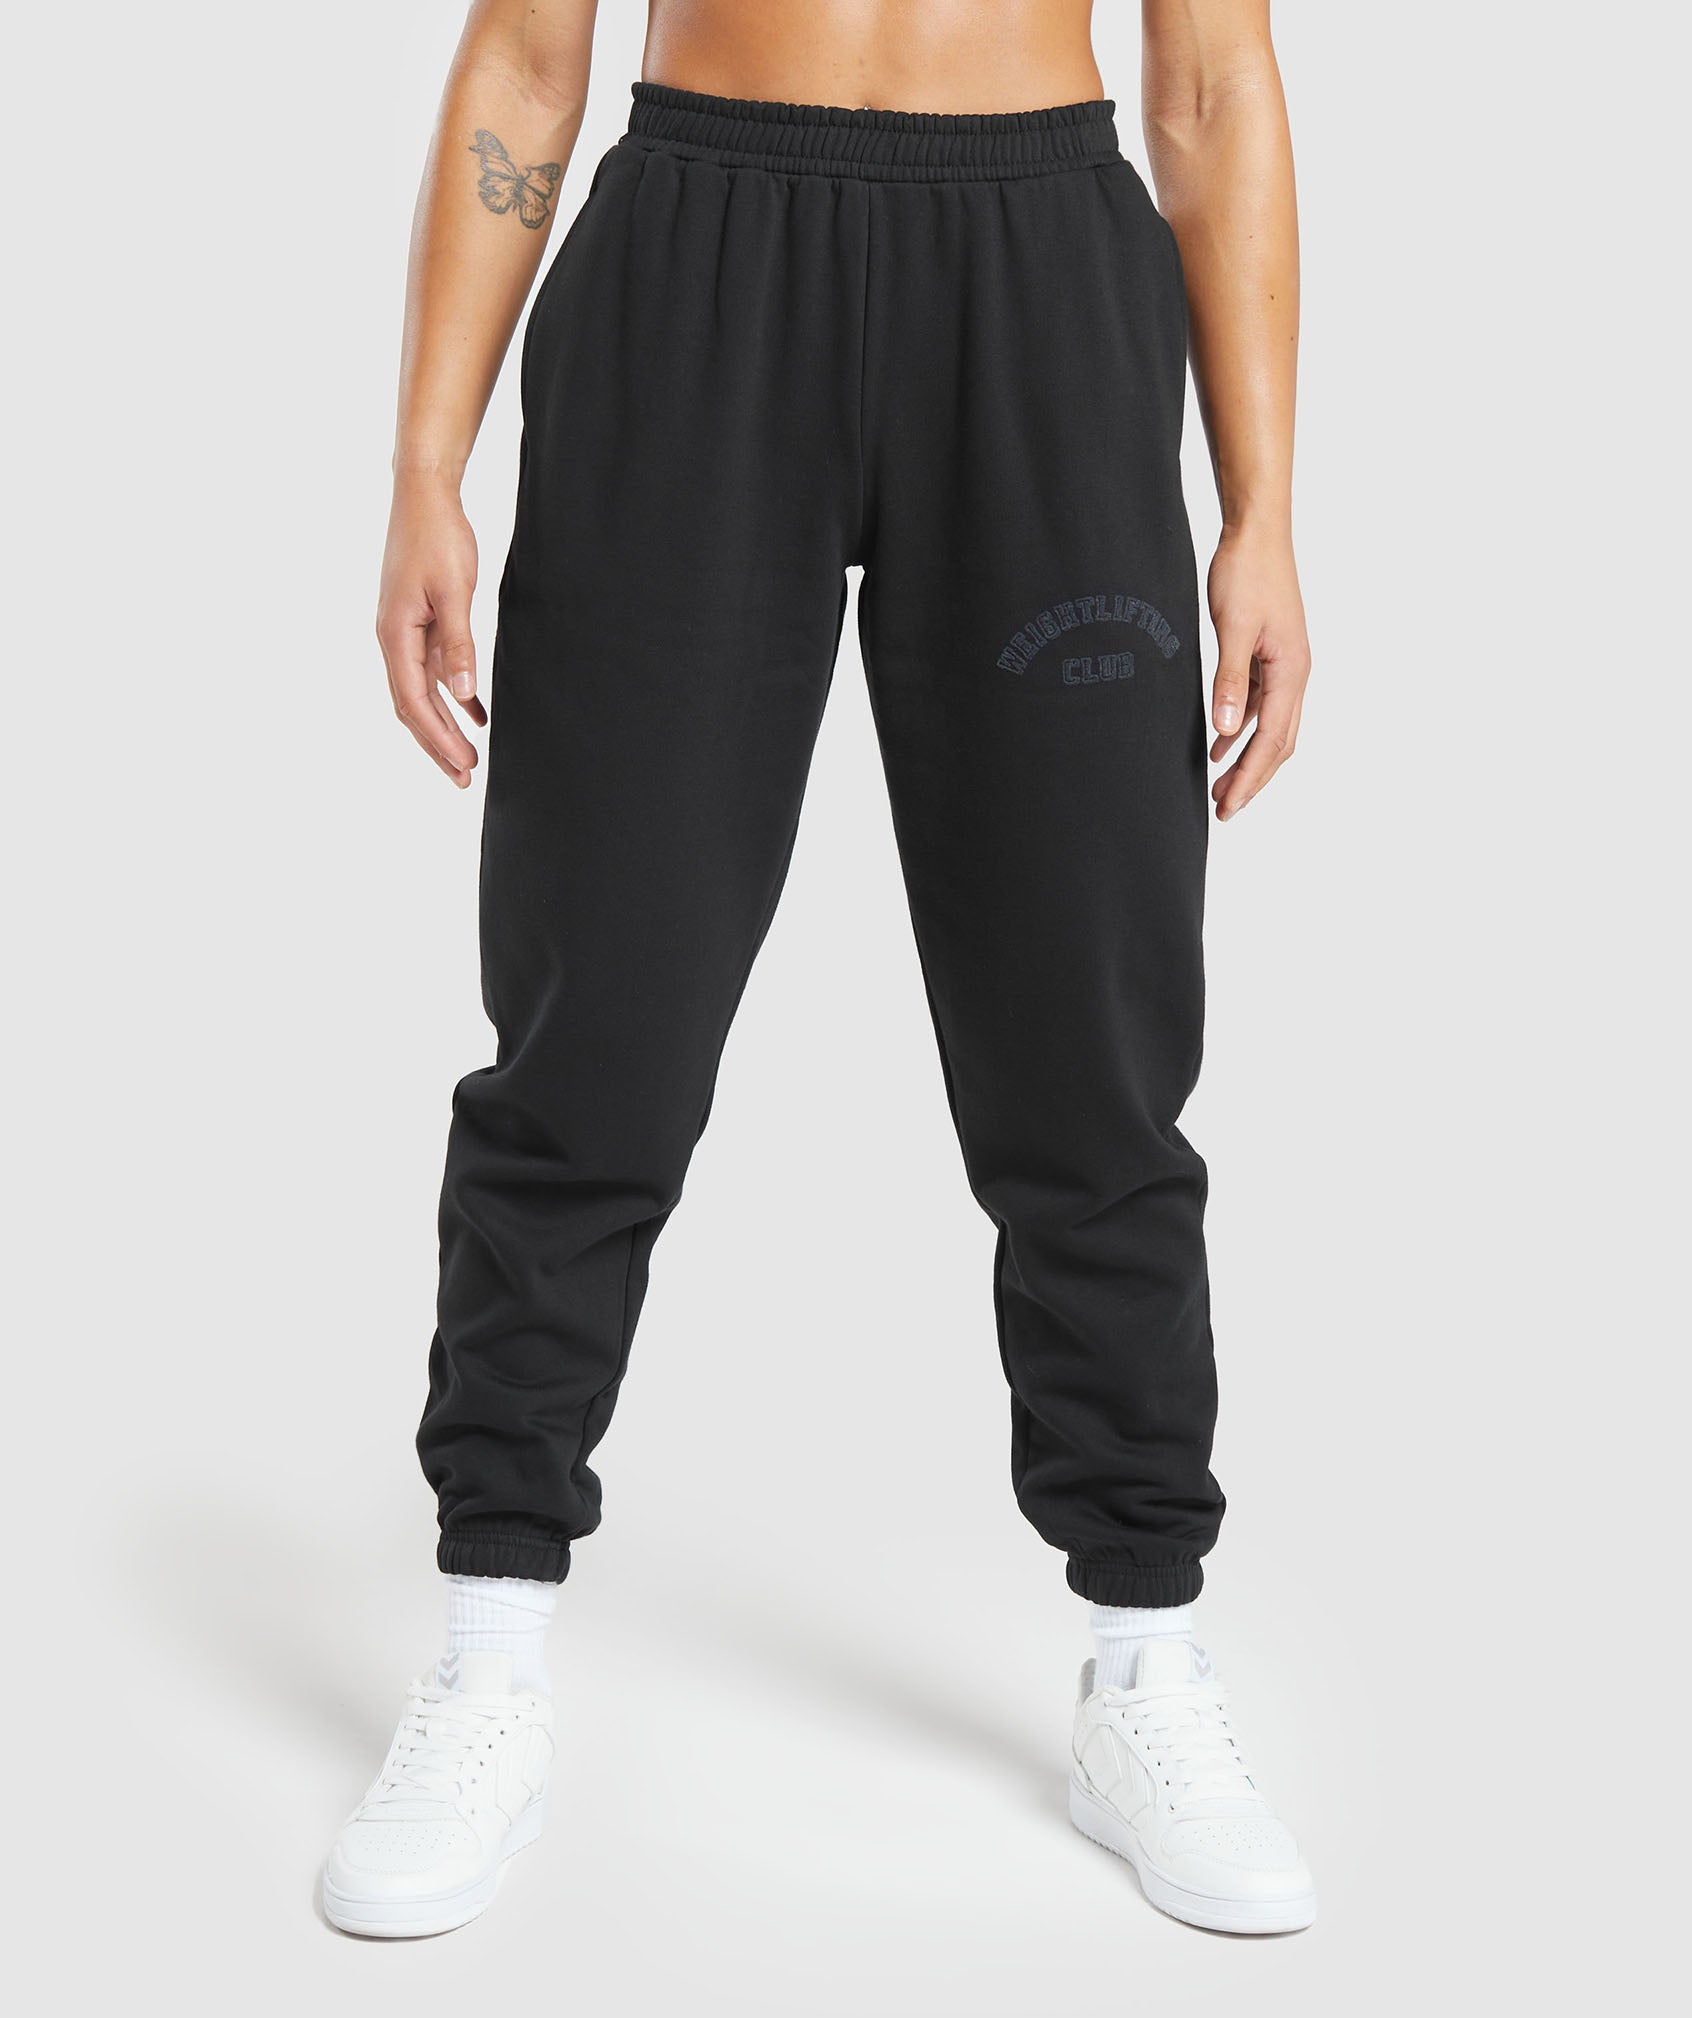 Gymshark Strength Department Graphic Joggers - Black